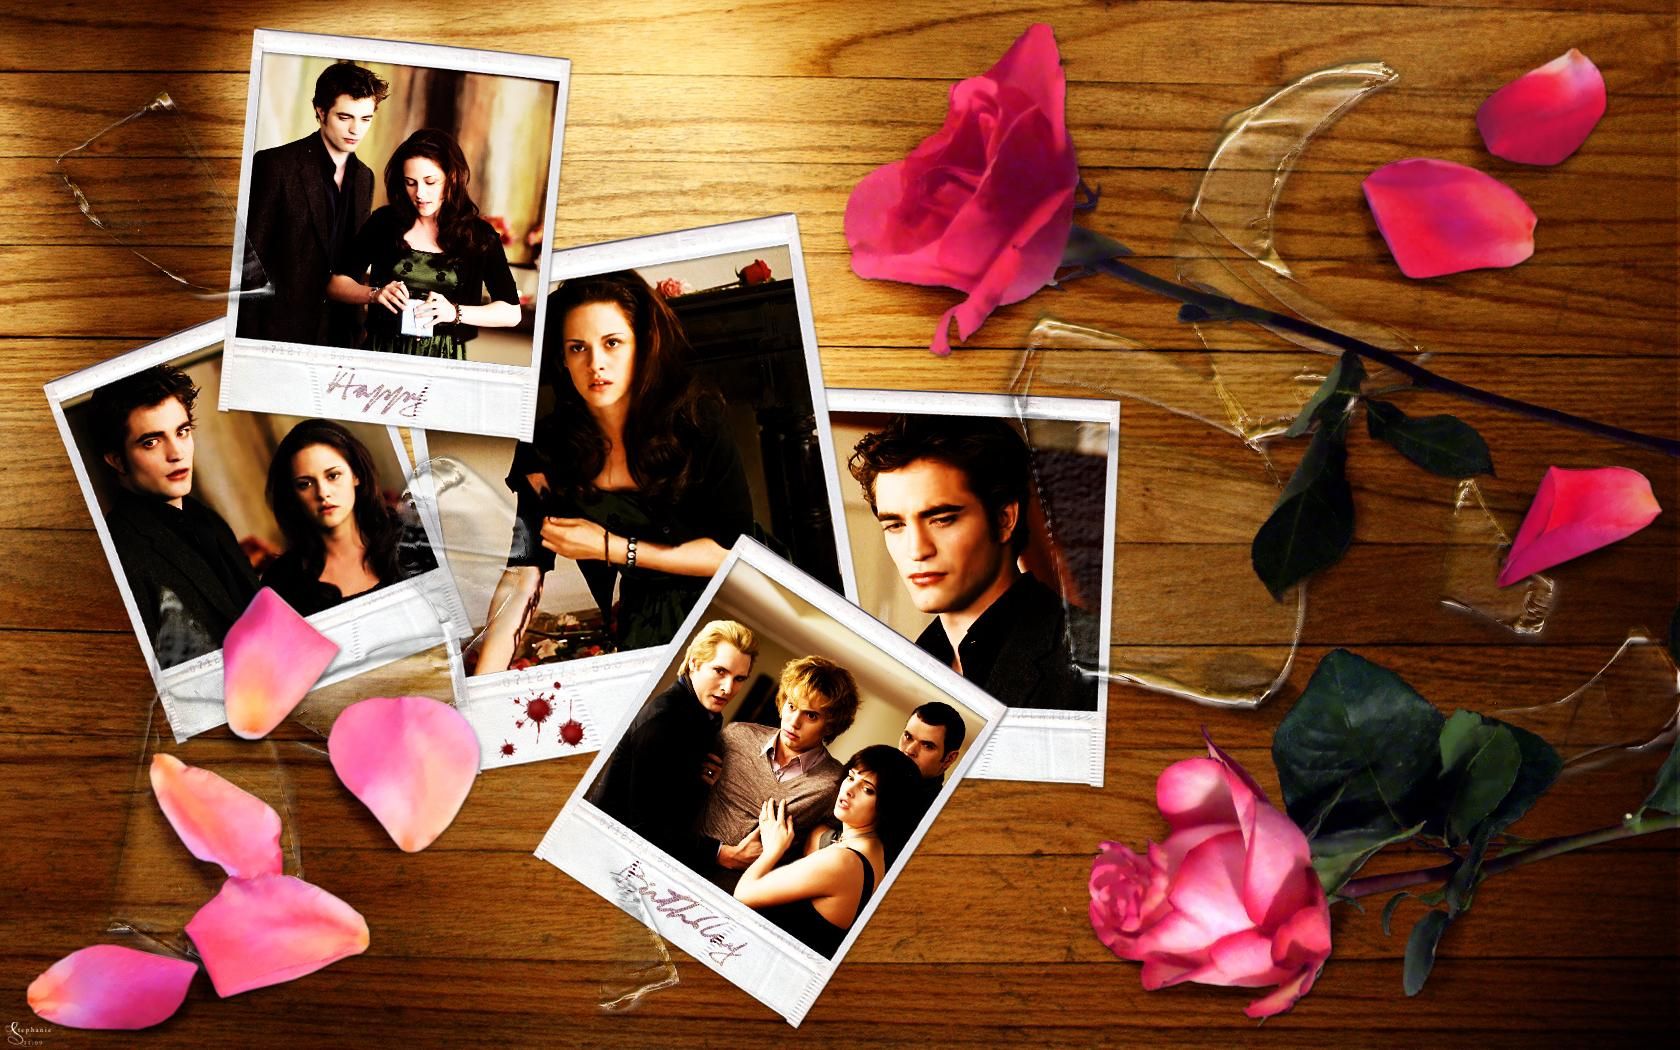 New Moon The Twilight Saga free Wallpapers (77 photos) for your ...